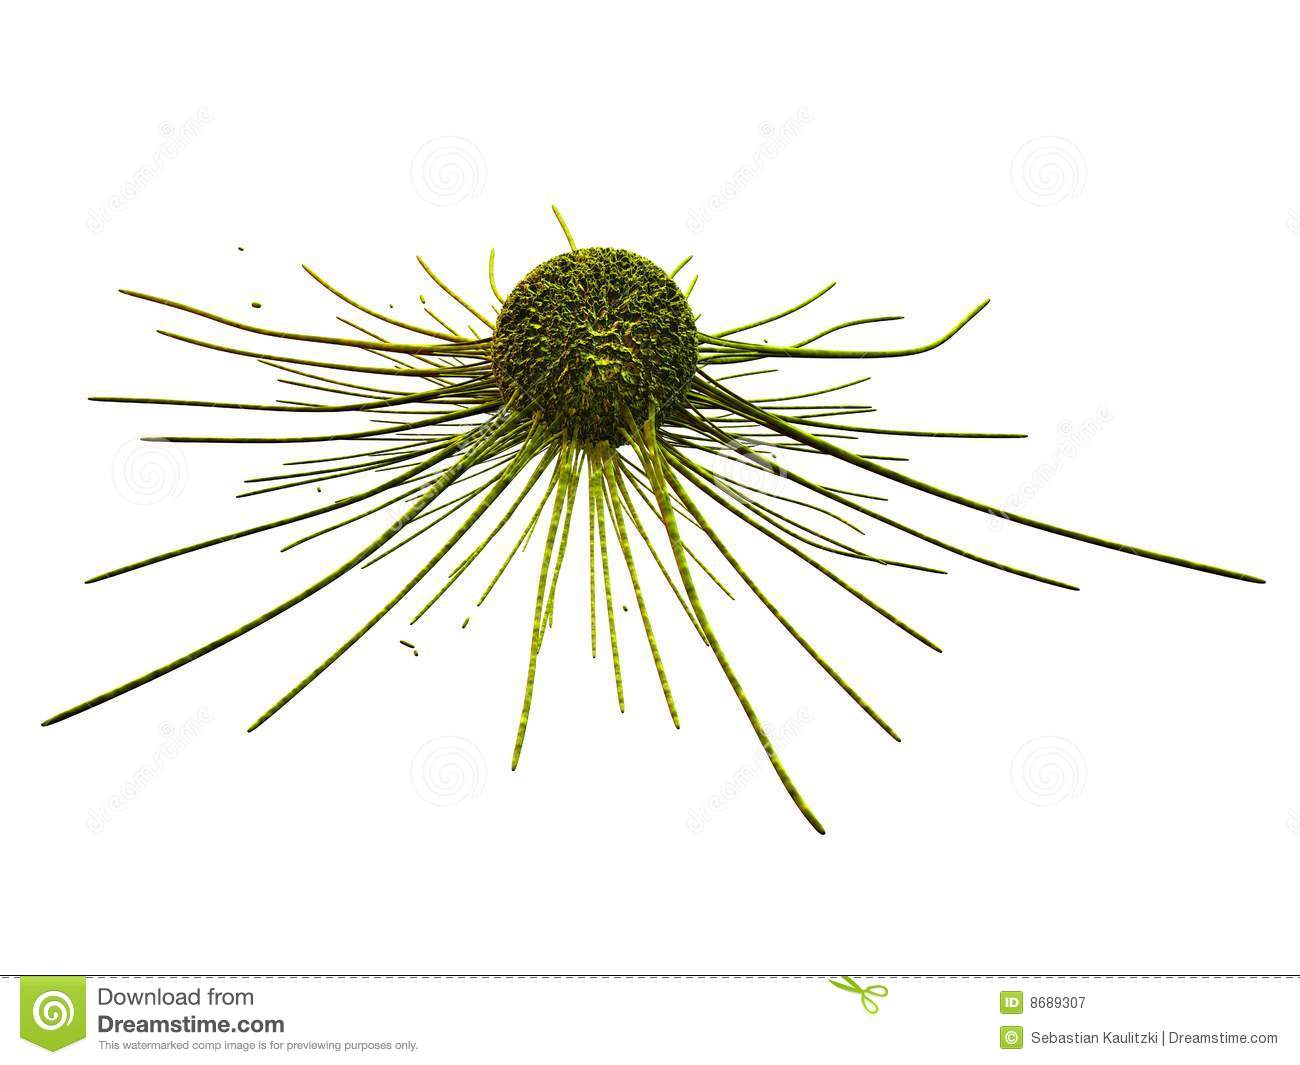 Cancer Cell Royalty Free Stock Photography   Image  8689307